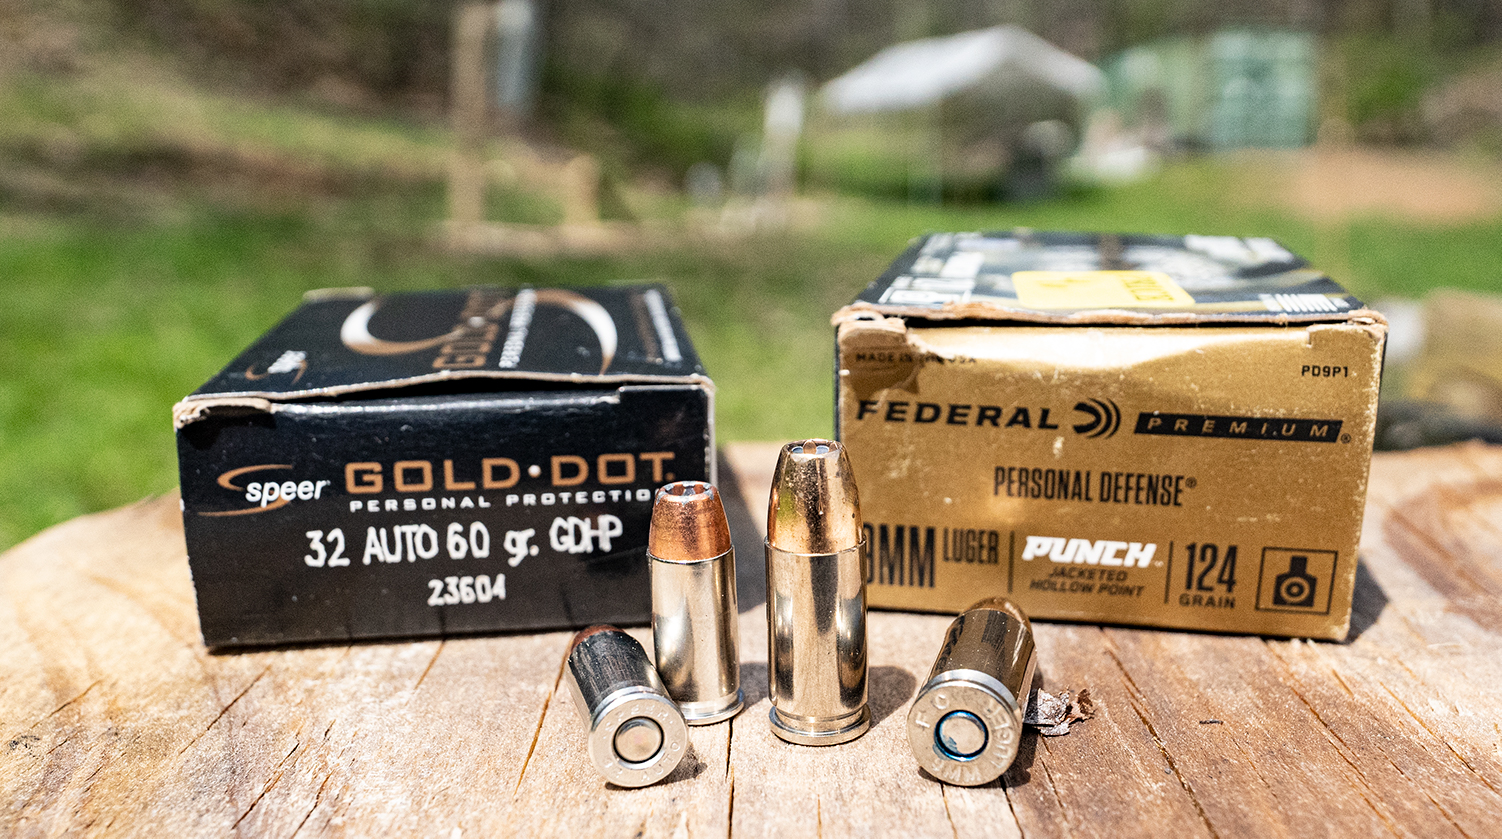 32 ACP next to larger 9mm ammo